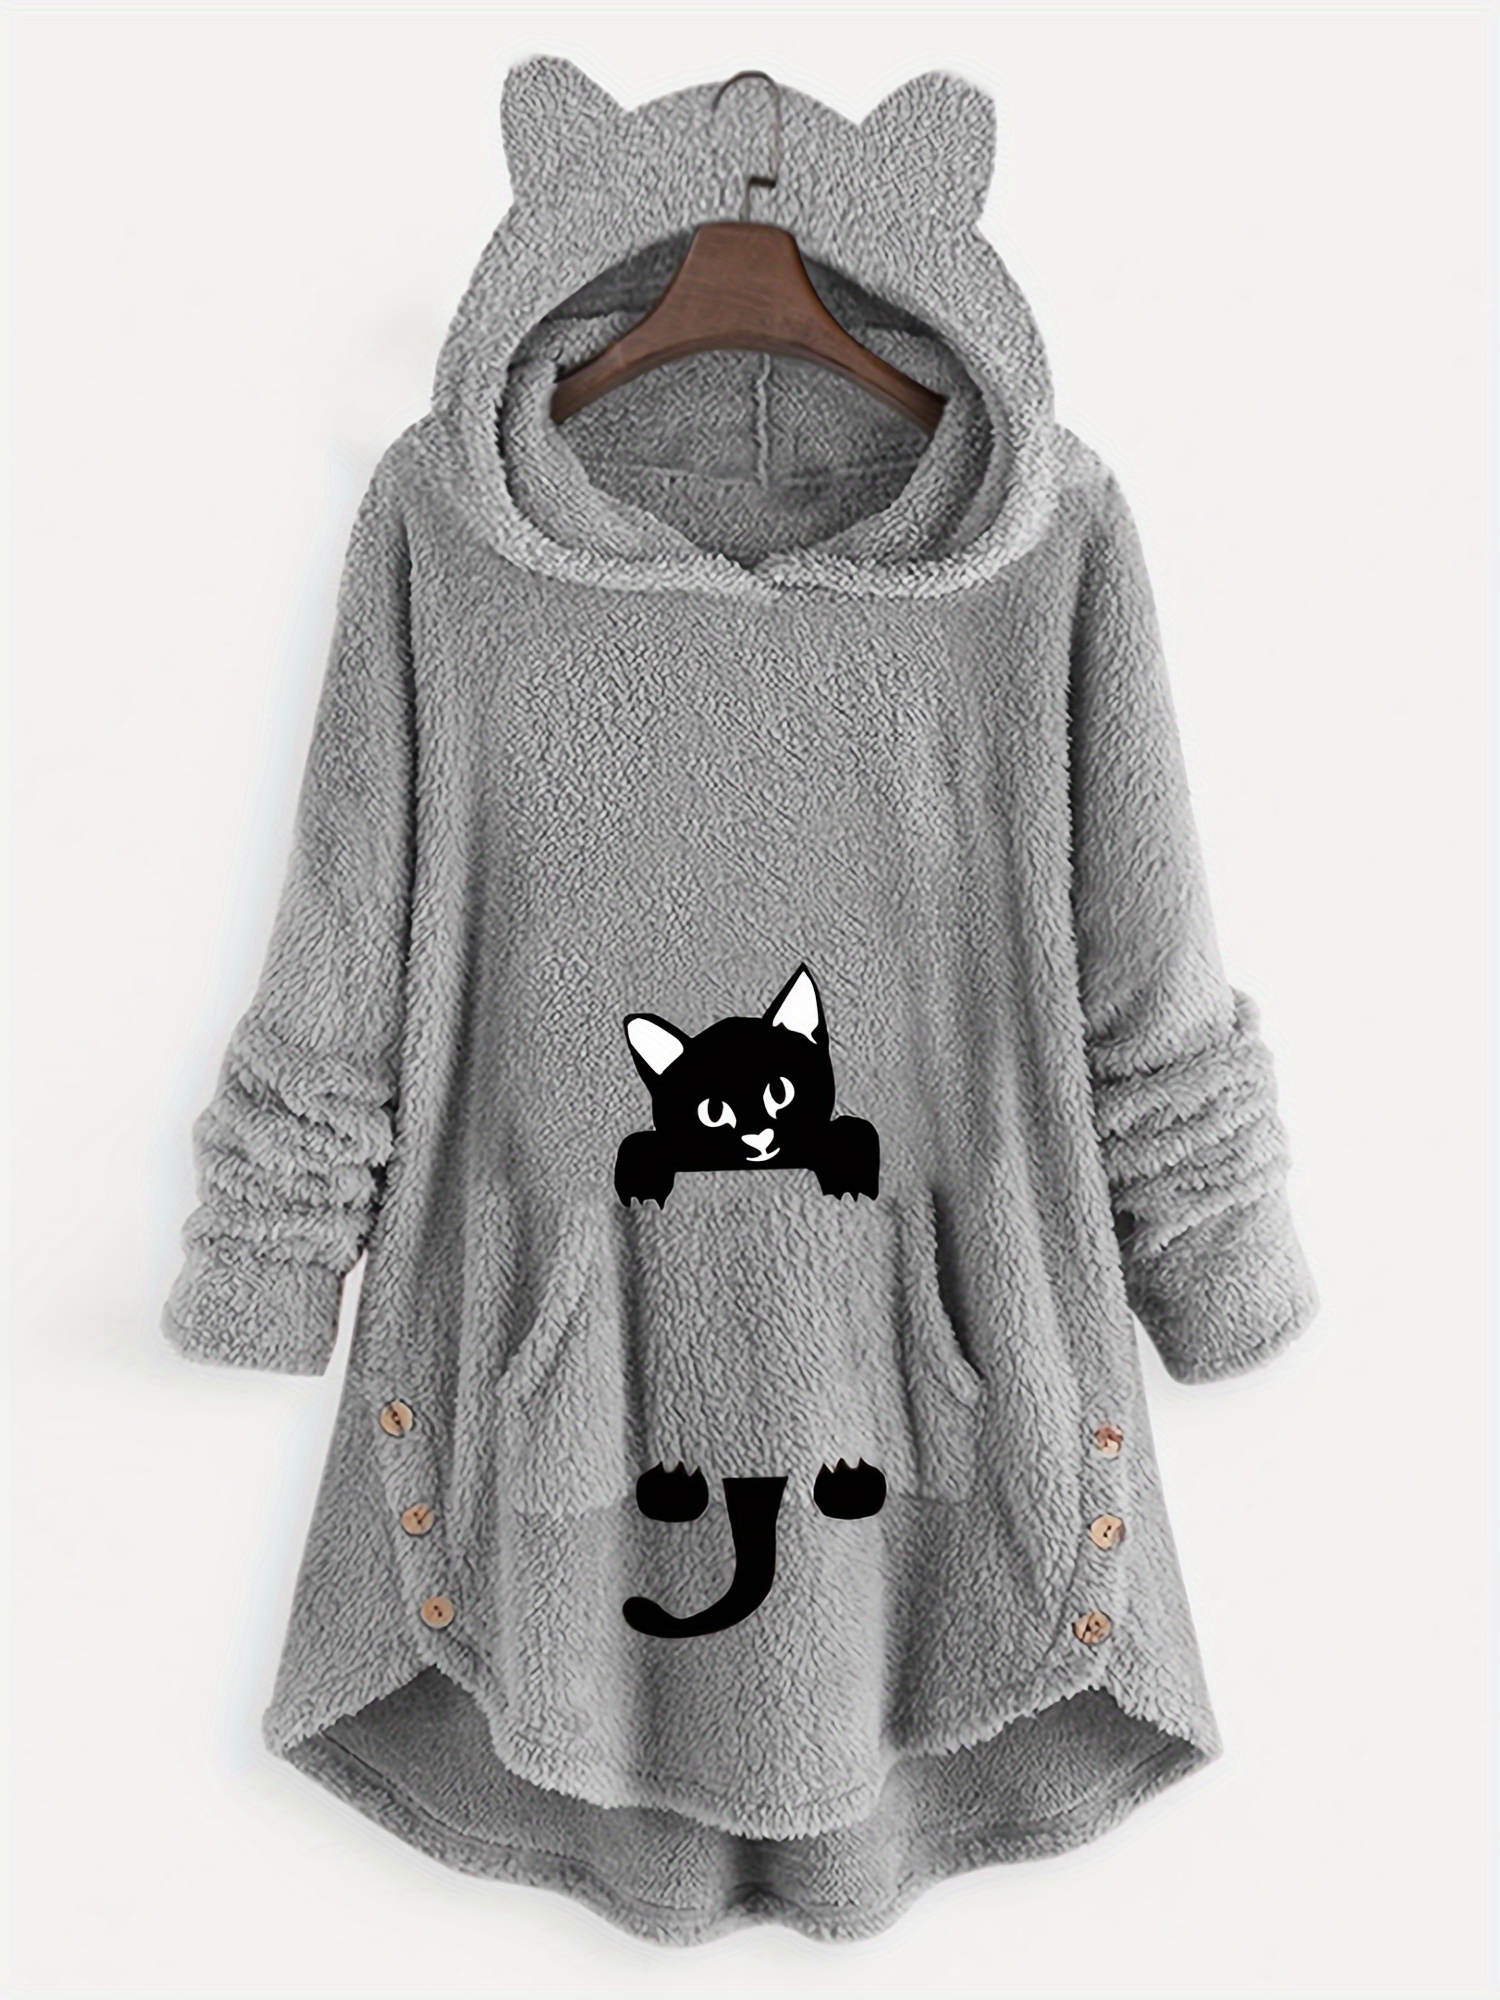 fuzzy cat ear hoodie loose oversized front pocket hooded sweater loungewear casual tops for winter womens clothing details 1